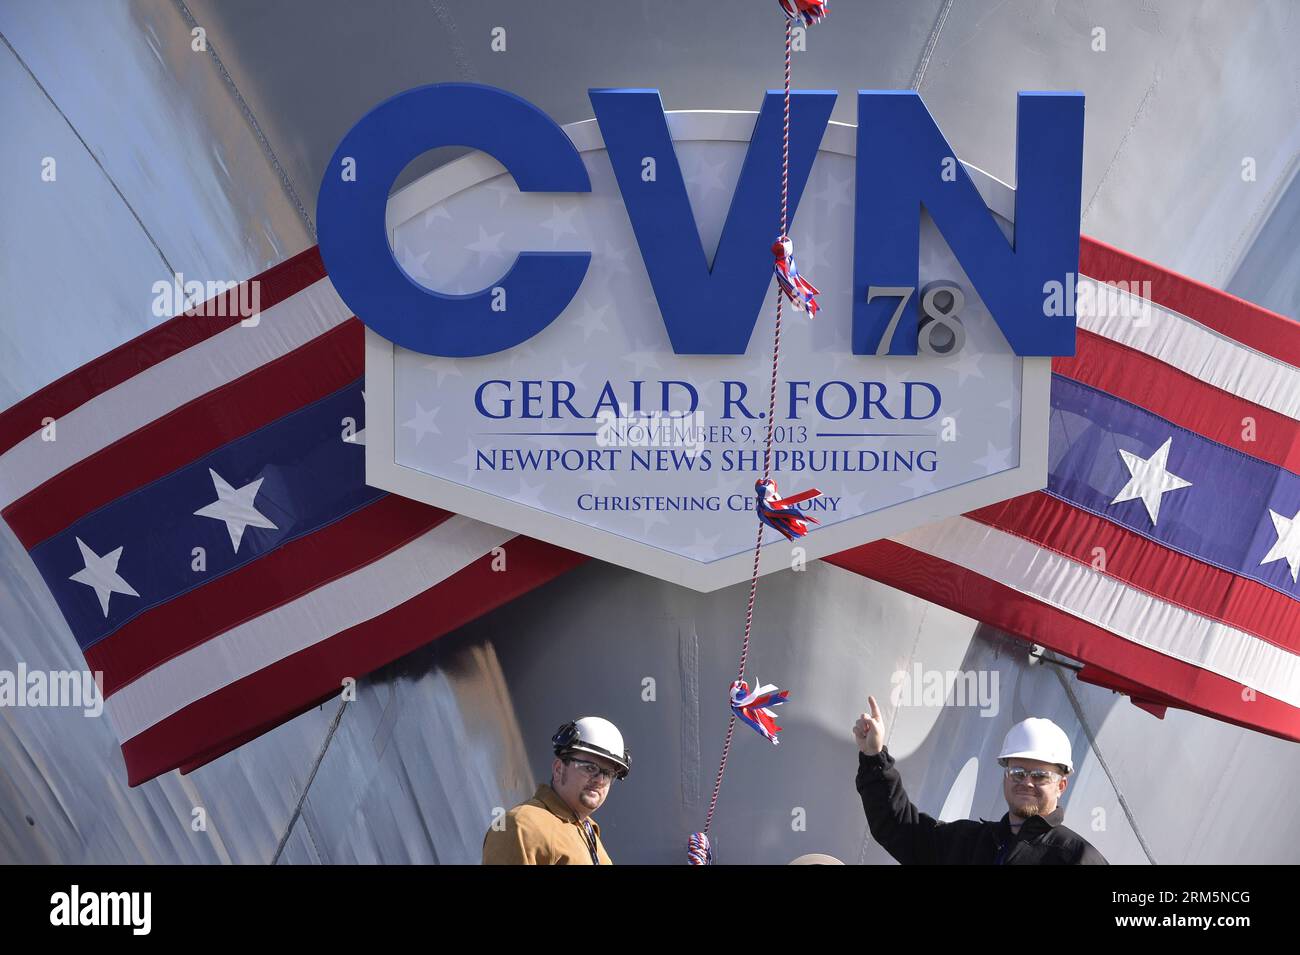 Bildnummer: 60693051  Datum: 08.11.2013  Copyright: imago/Xinhua Two workers prepare for the christen for USS Gerald R. Ford (CVN 78) at the Huntington-Ingalls Industries Newport News shipyard in Virginia, the United States, Nov. 8, 2013. U.S. Navy will christen aircraft carrier Gerald R. Ford, the first ship in a new class of super carrier, at a ceremony scheduled for Saturday. (Xinhua/Zhang Jun) US-VIRGINIA-USS GERALD R. FORD-CVN 78 PUBLICATIONxNOTxINxCHN Marine Flugzeugträger Kriegsschiff xas x0x 2013 quer premiumd     60693051 Date 08 11 2013 Copyright Imago XINHUA Two Workers prepare for Stock Photo